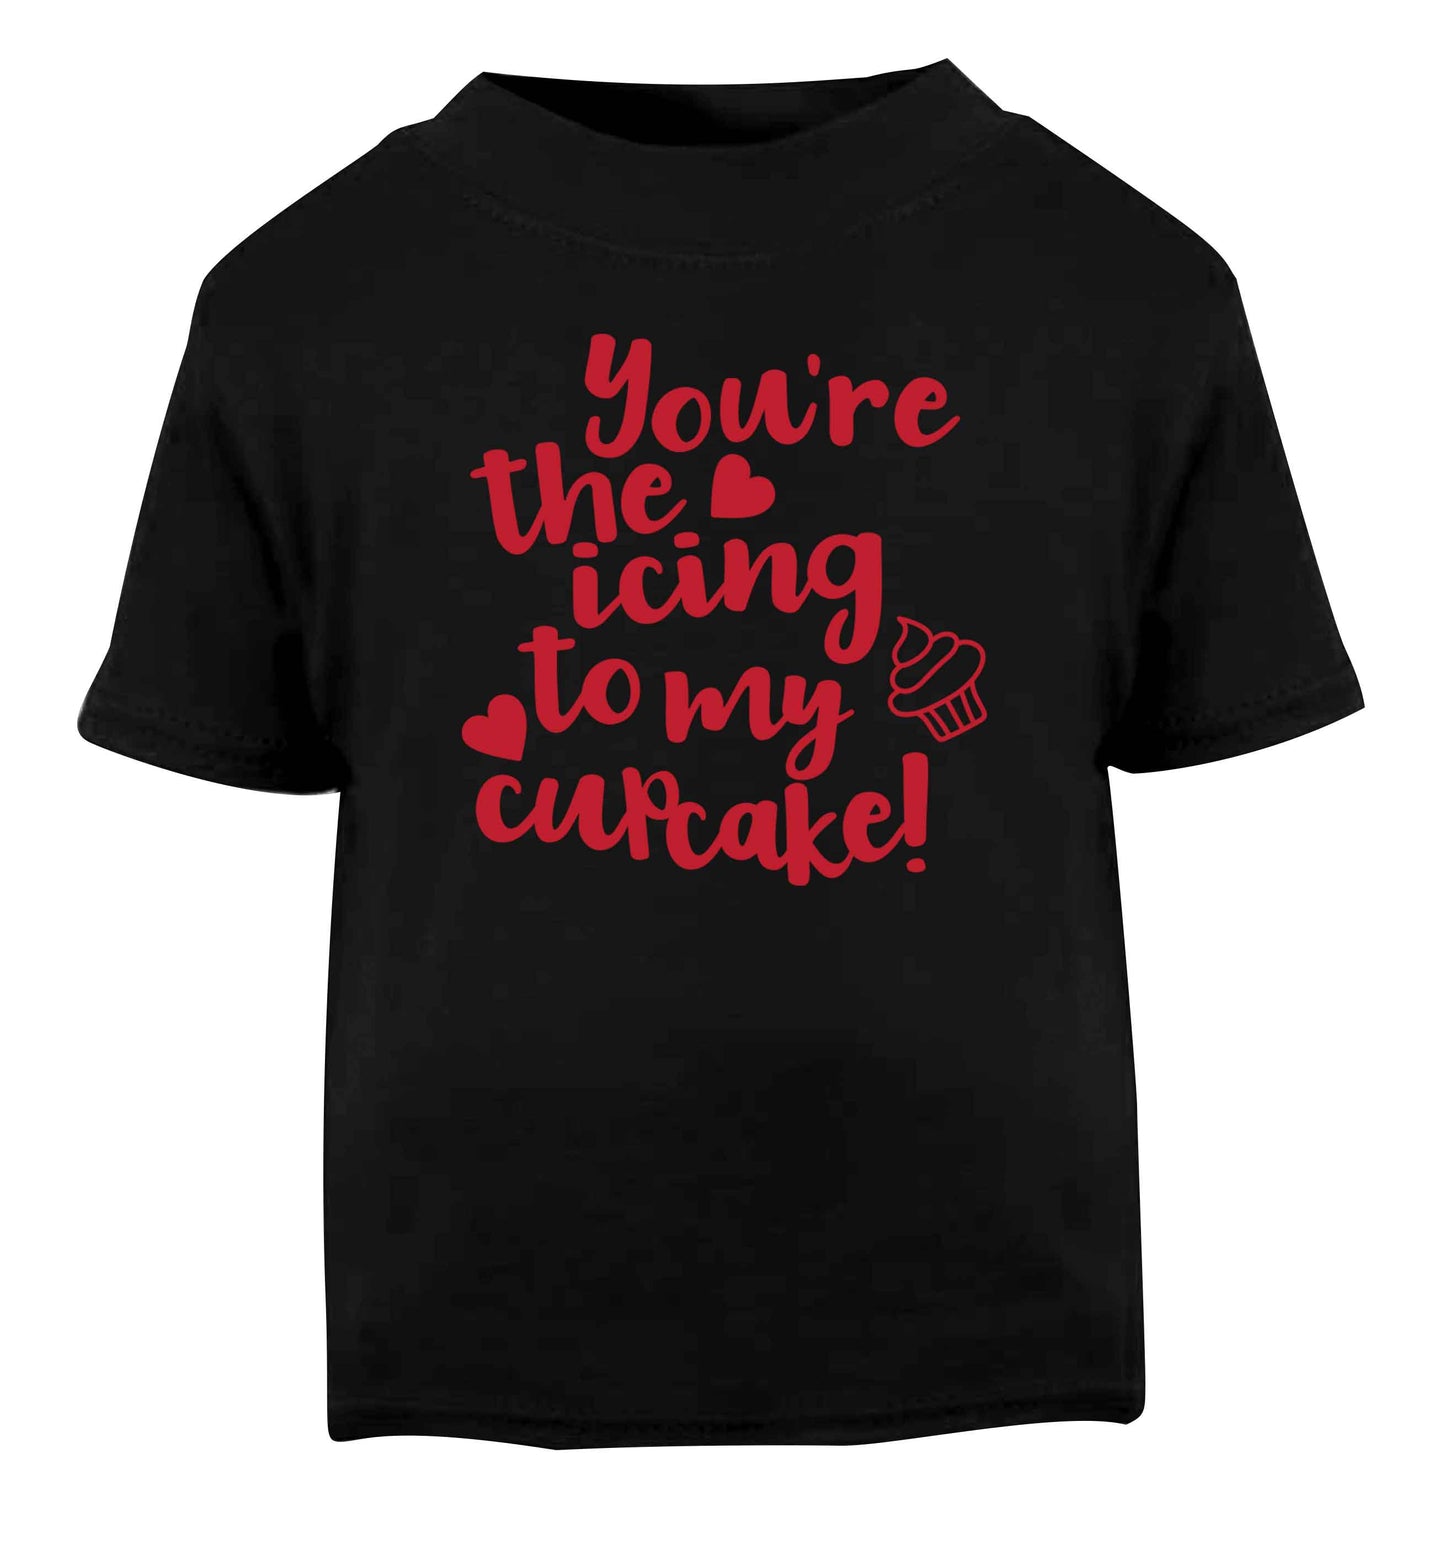 You're the icing to my cupcake Black Baby Toddler Tshirt 2 years